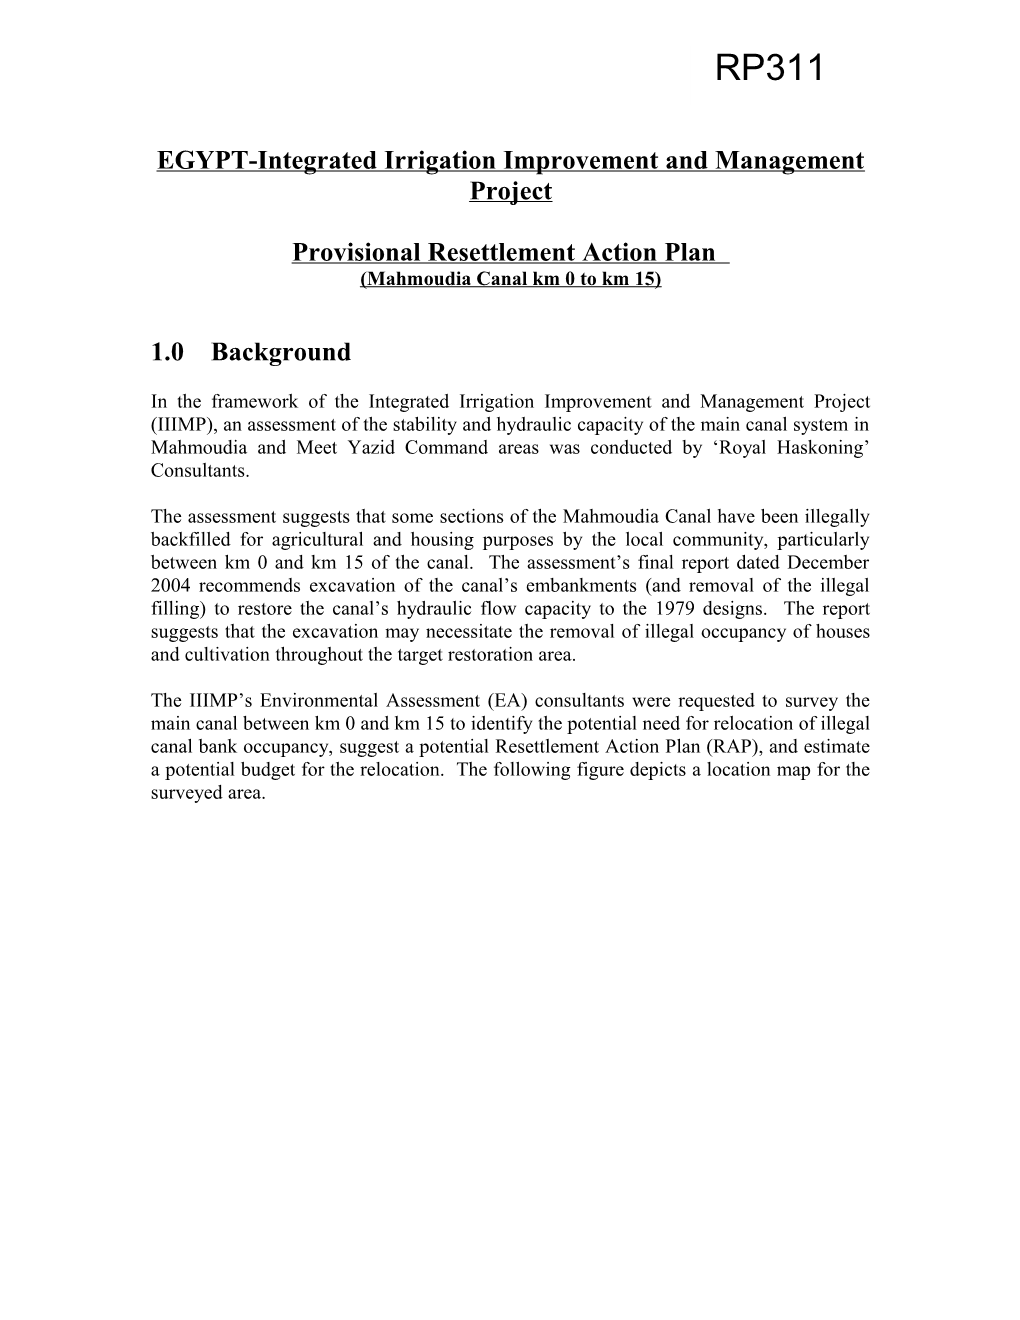 EGYPT-Integrated Irrigation Improvement and Management Project